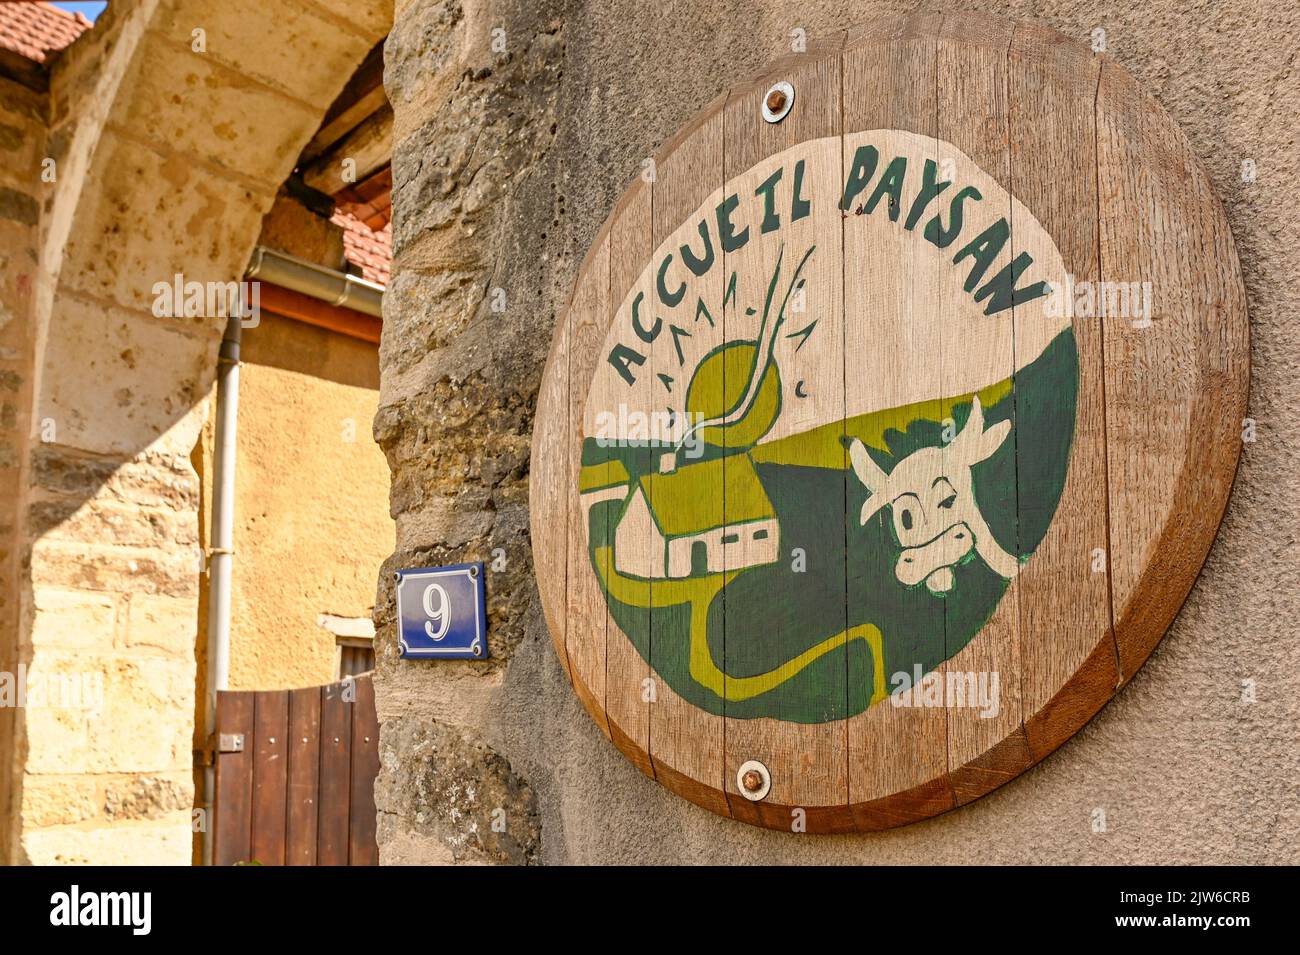 Accueil Paysan: the French label for farmers welcoming guests to stay on their  rural farm property Stock Photo